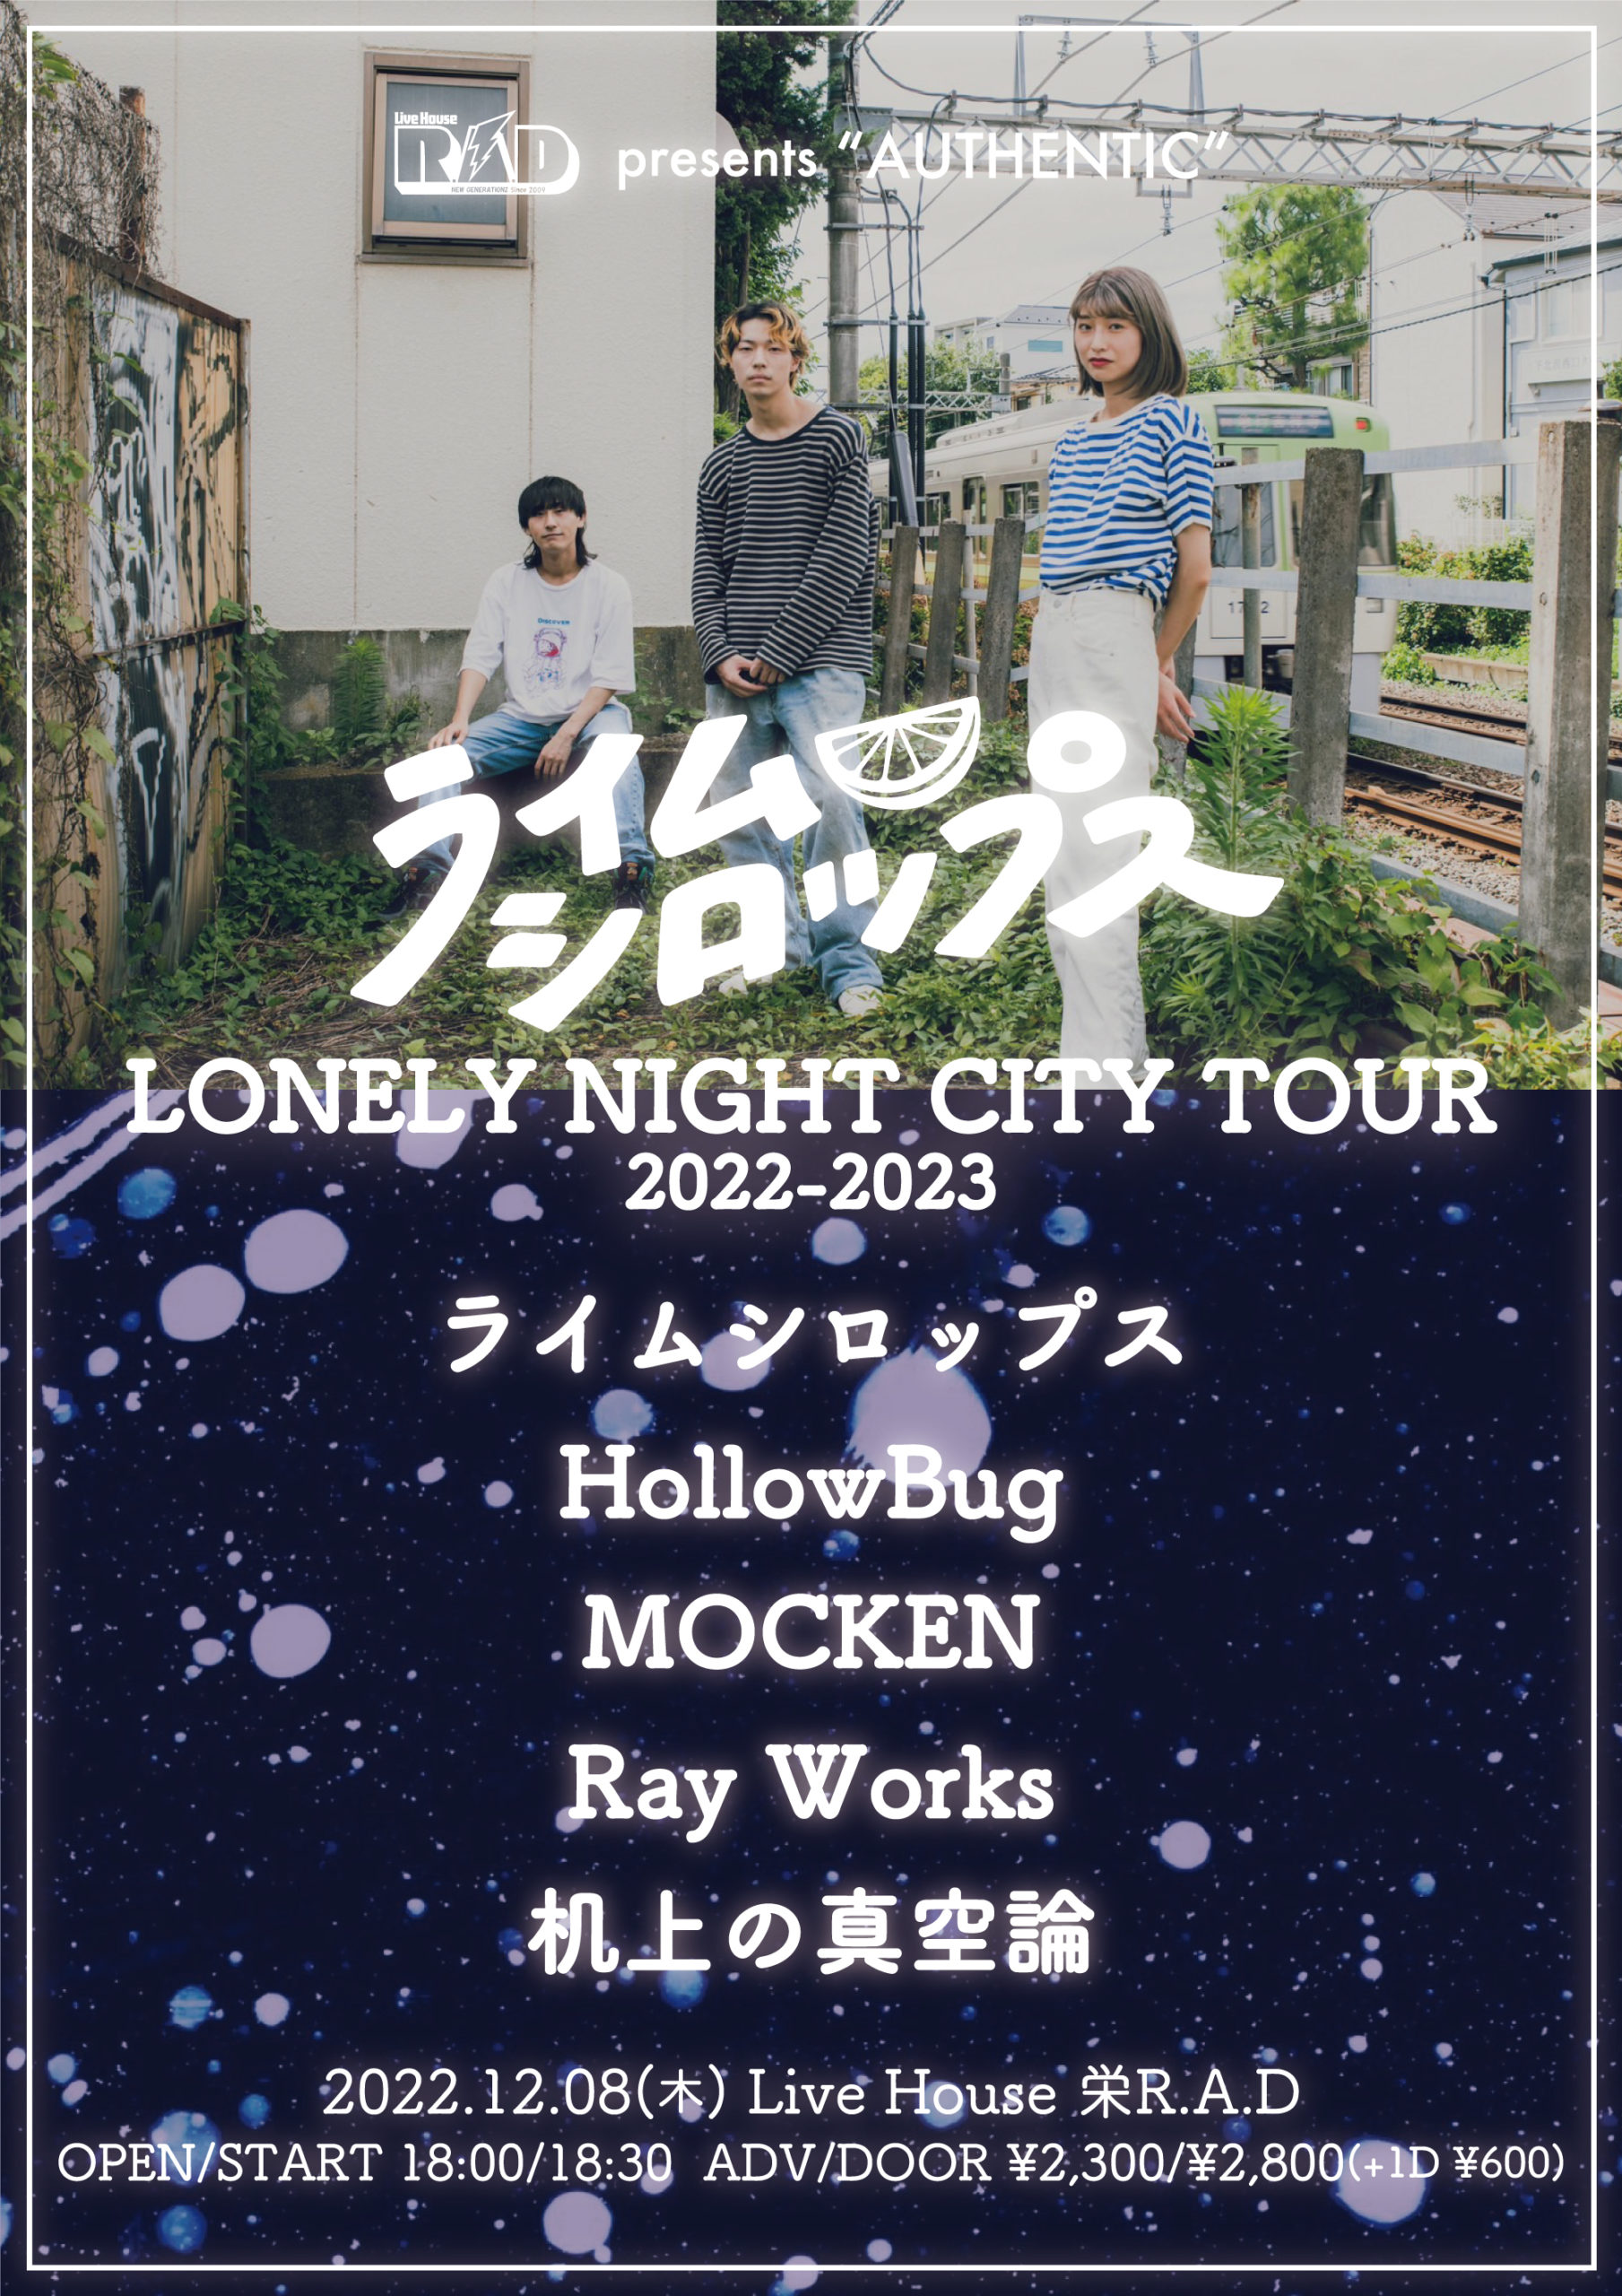 R.A.D presents "AUTHENTIC" ライムシロップス "LONELY NIGHT CITY TOUR 2022-2023"